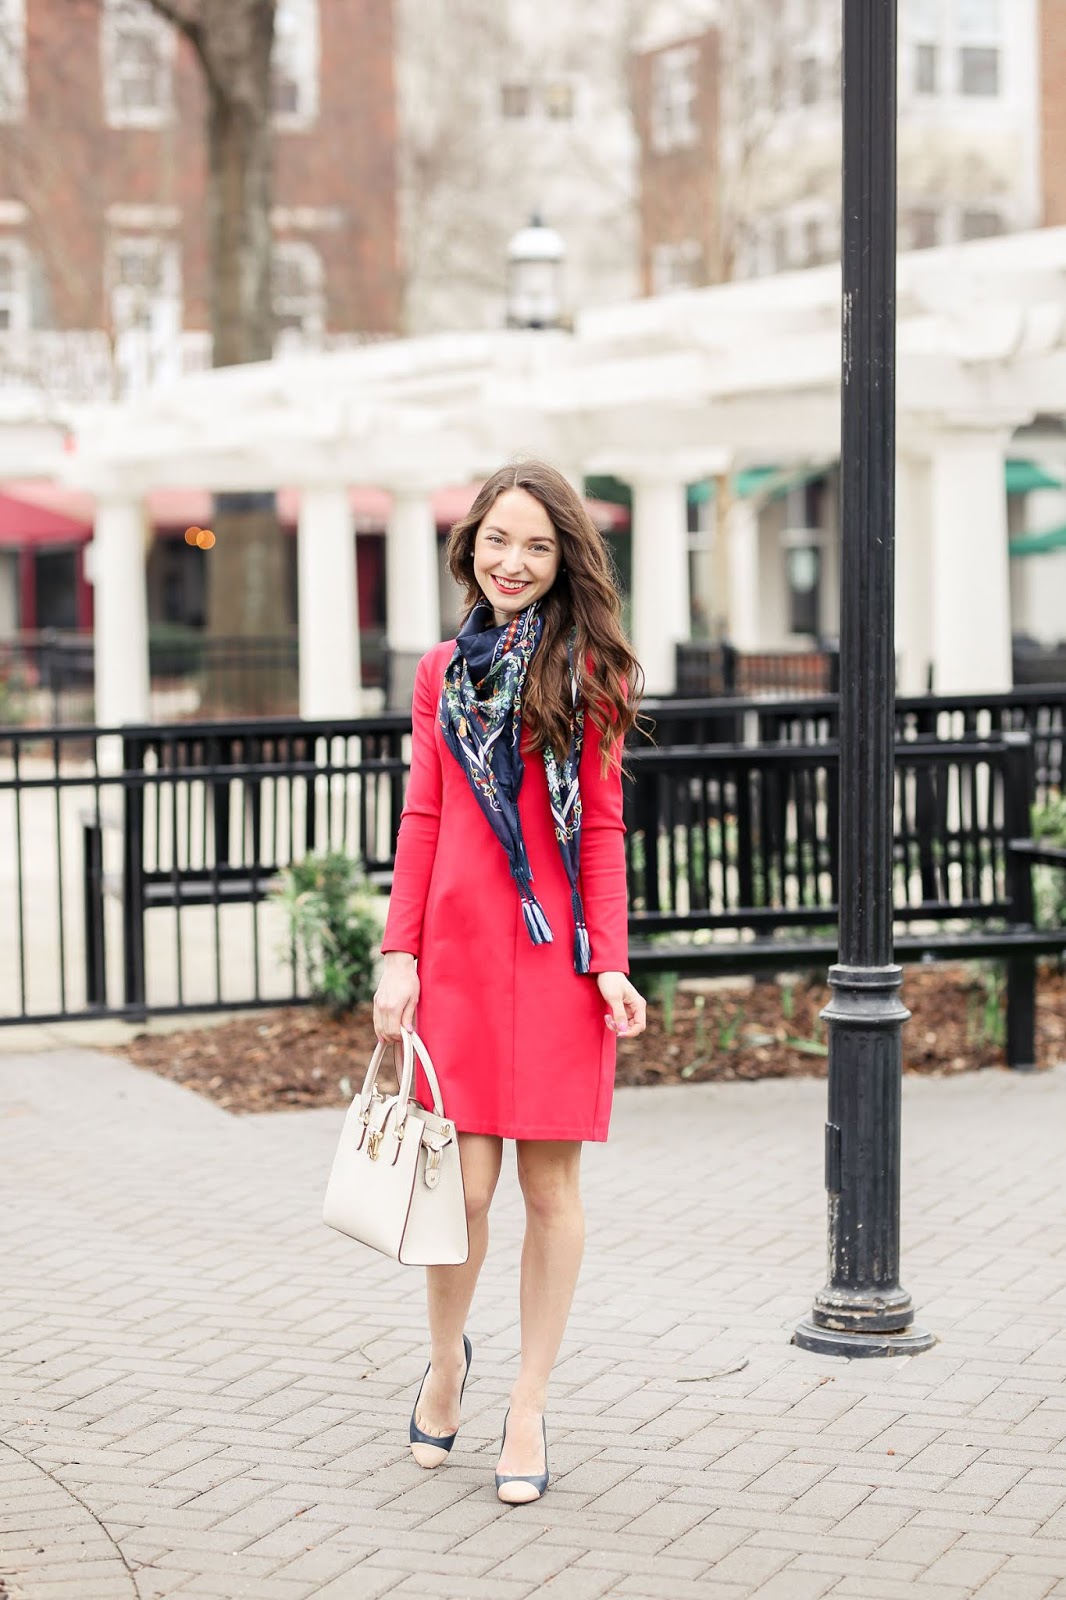 7 Outfit Ideas for Valentine's Day Caralina Style